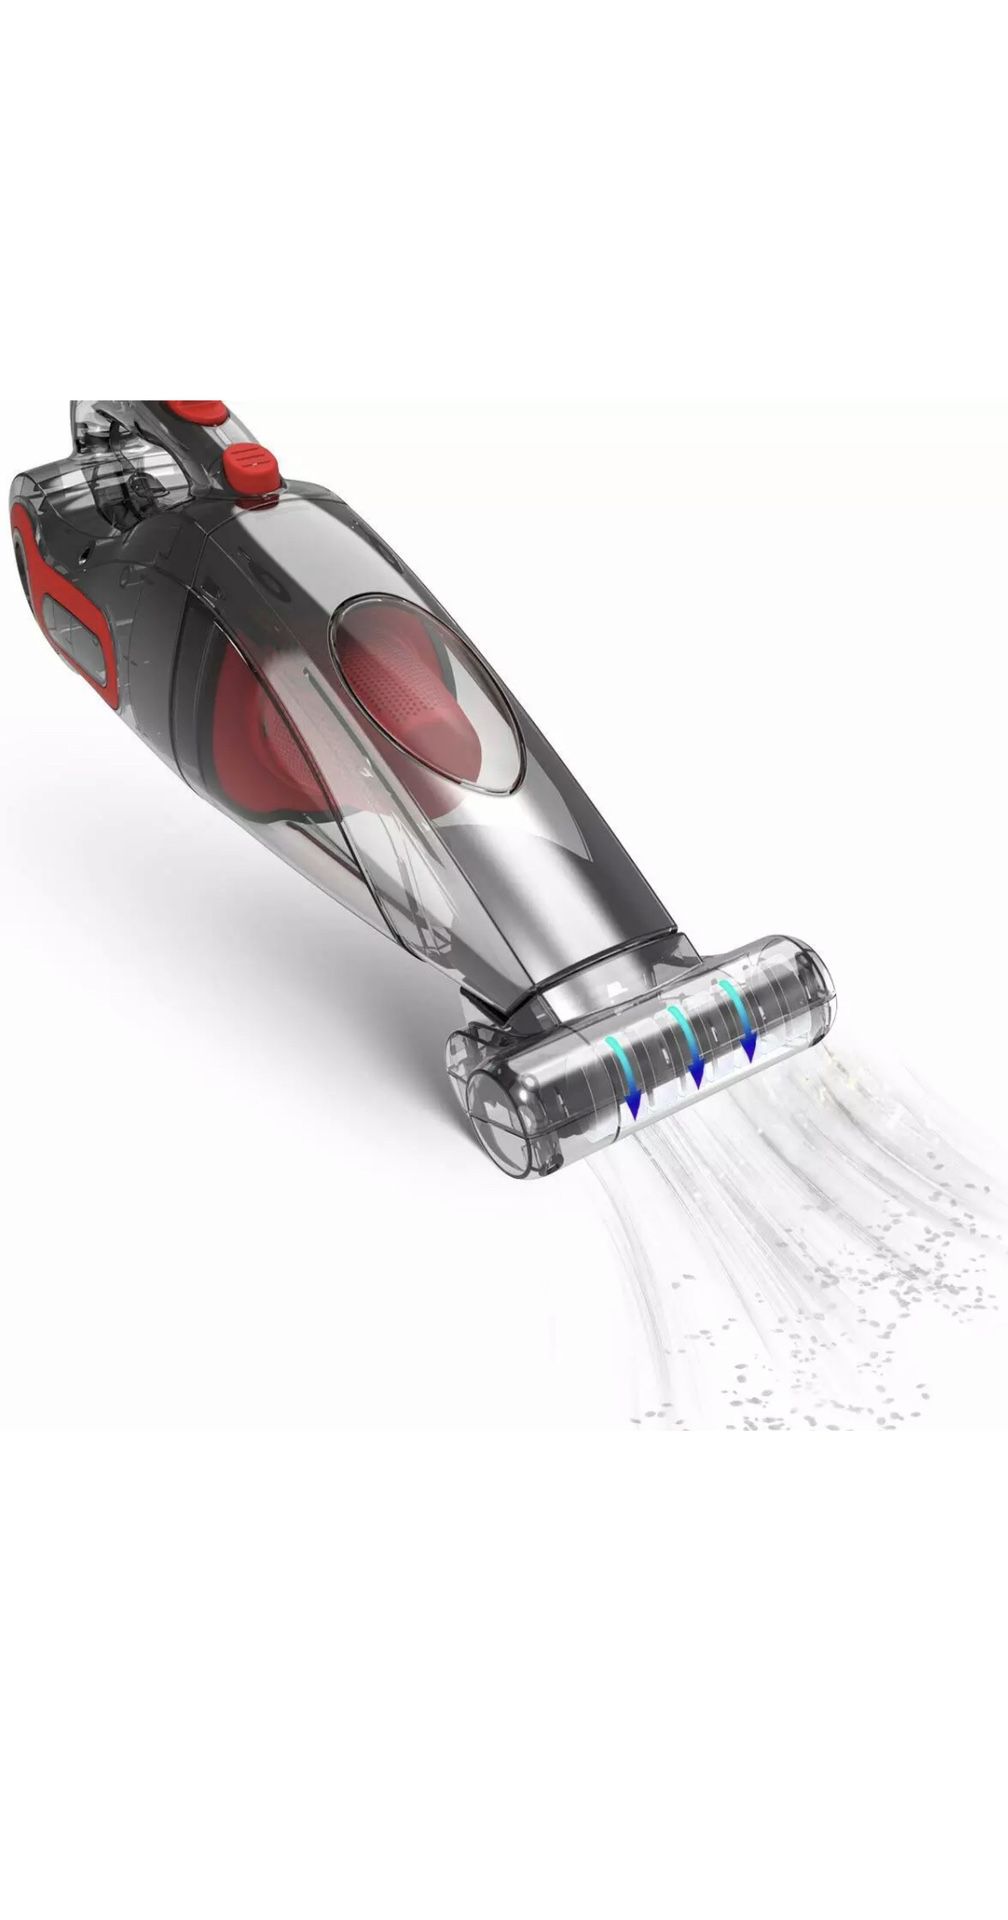 New Dibea Handheld Cordless Vacuum Cleaner Lightweight Rechargeable for Home Pet Hair Car Cleaning Motorized Brush, BX350